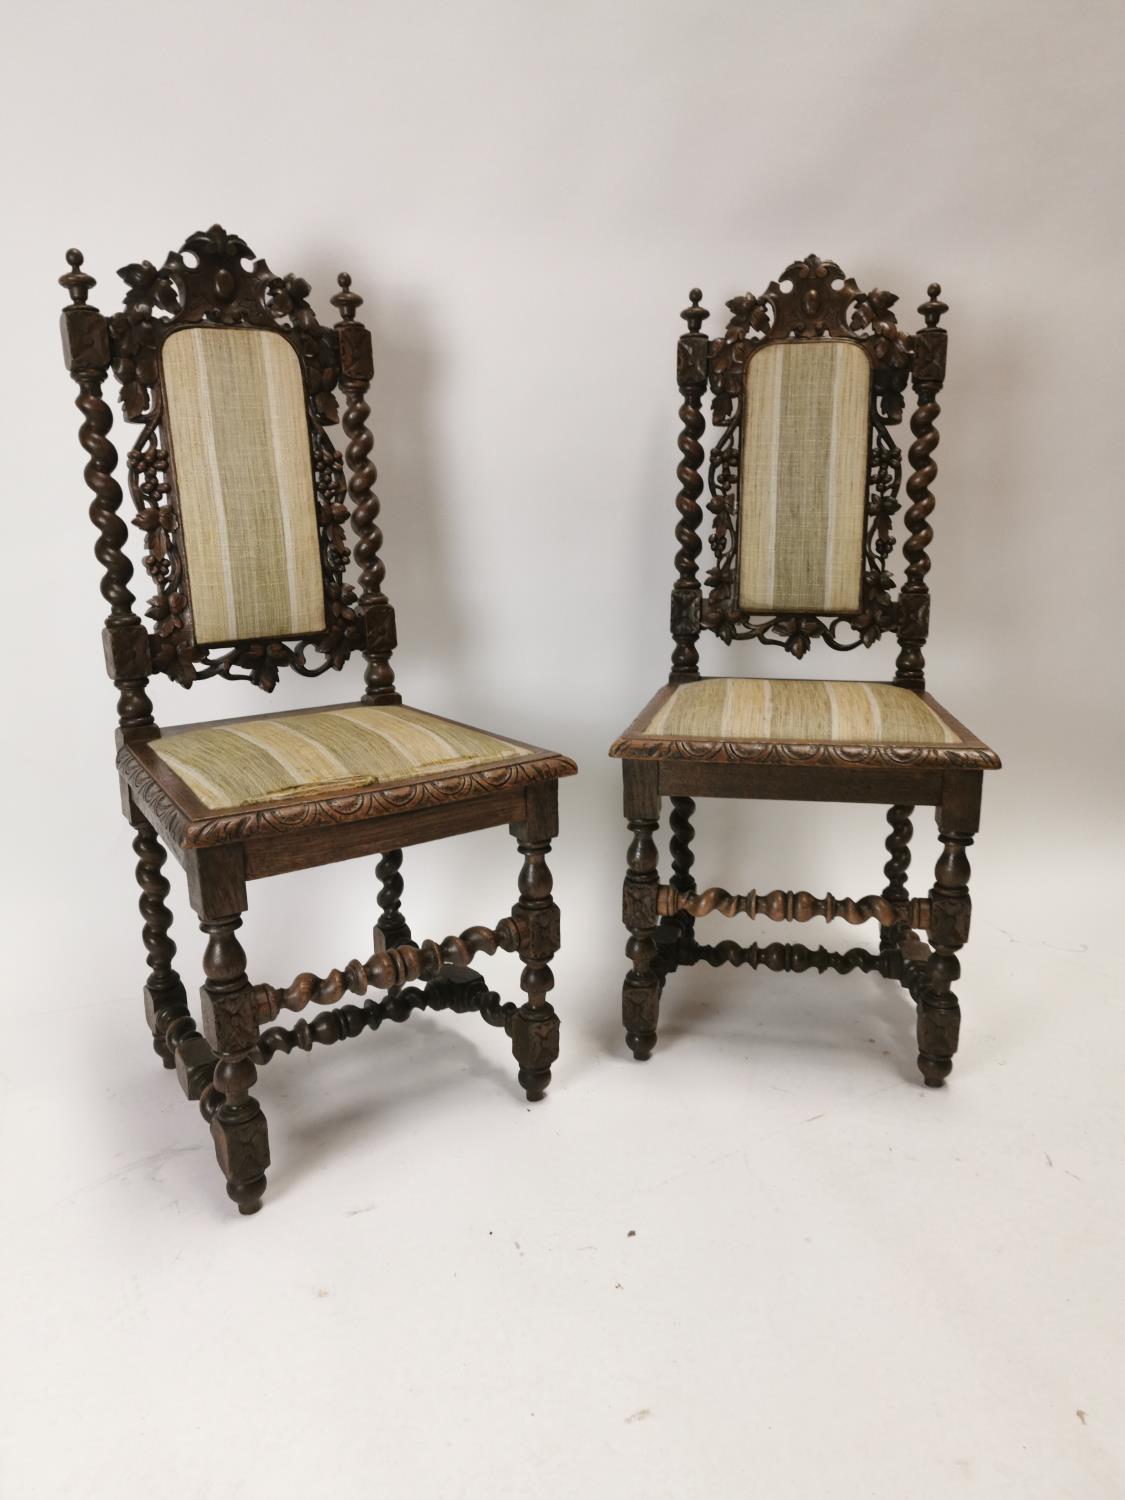 19th. C. upholstered carved oak hall chairs decorated with vines. {108 cm H x 48 cm W x 43 cm D}.